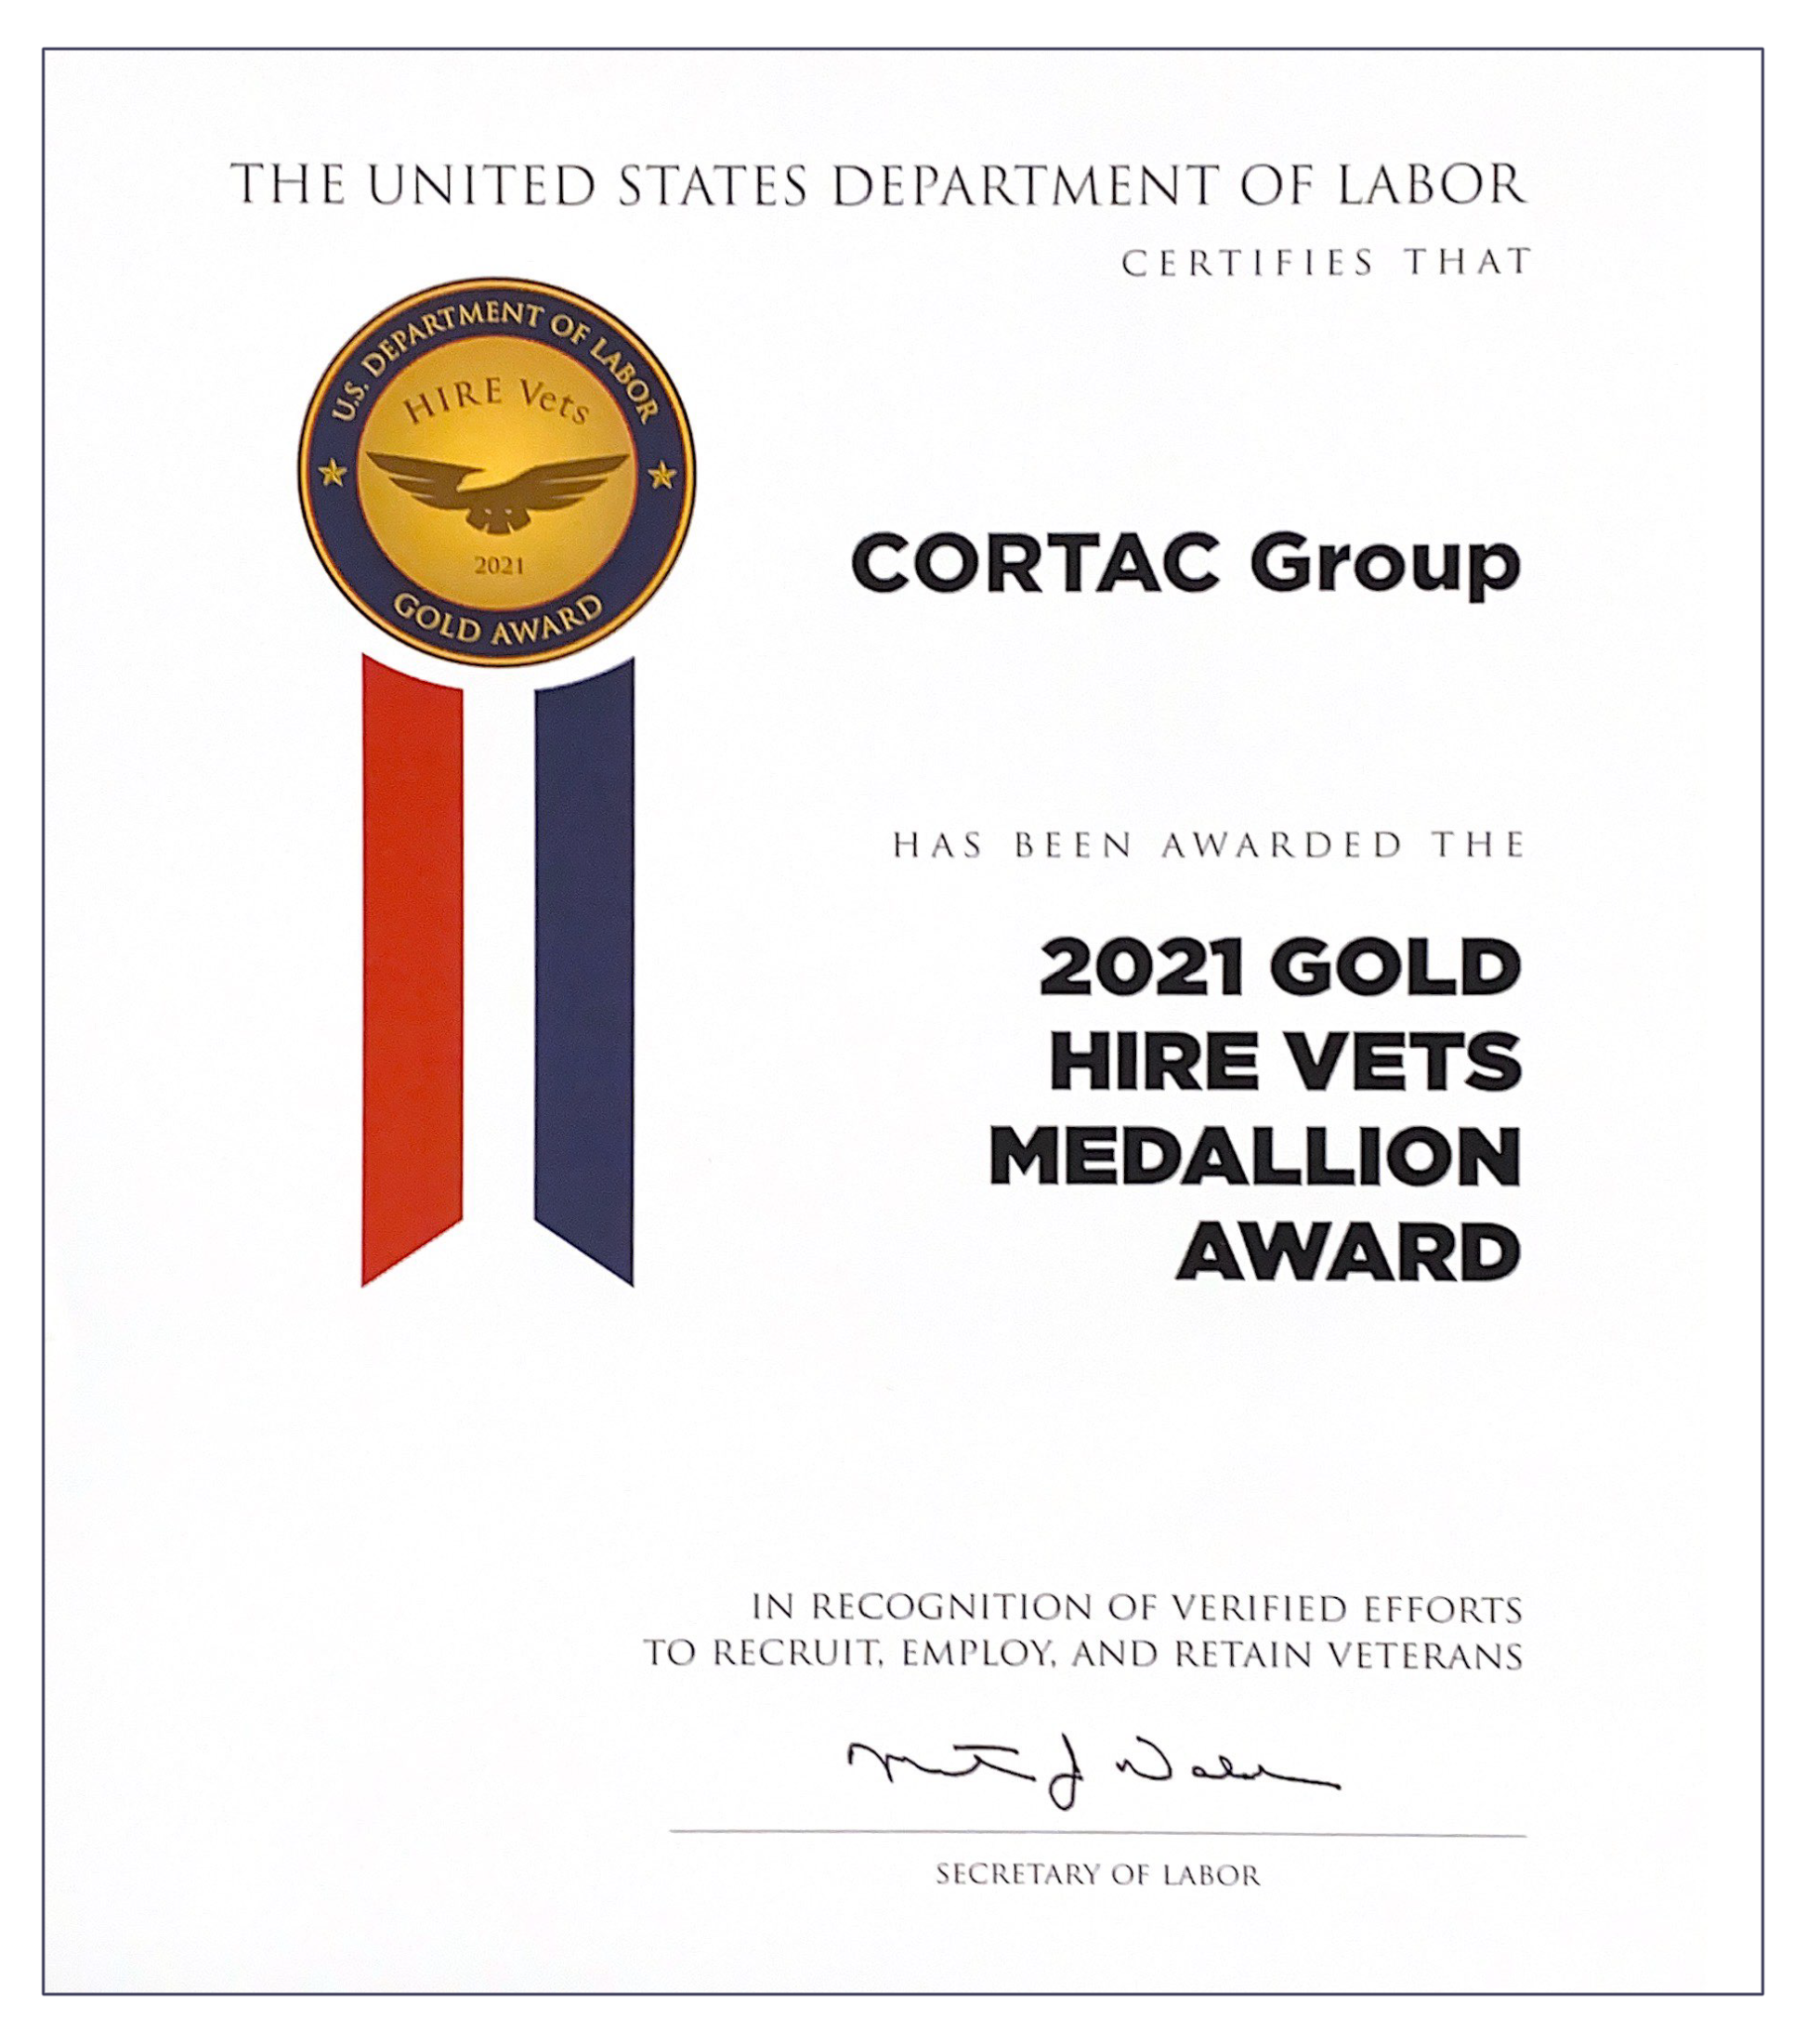 CORTAC Group presented with 2021 Gold Hire Vets Medallion Award by U.S. Department of Labor